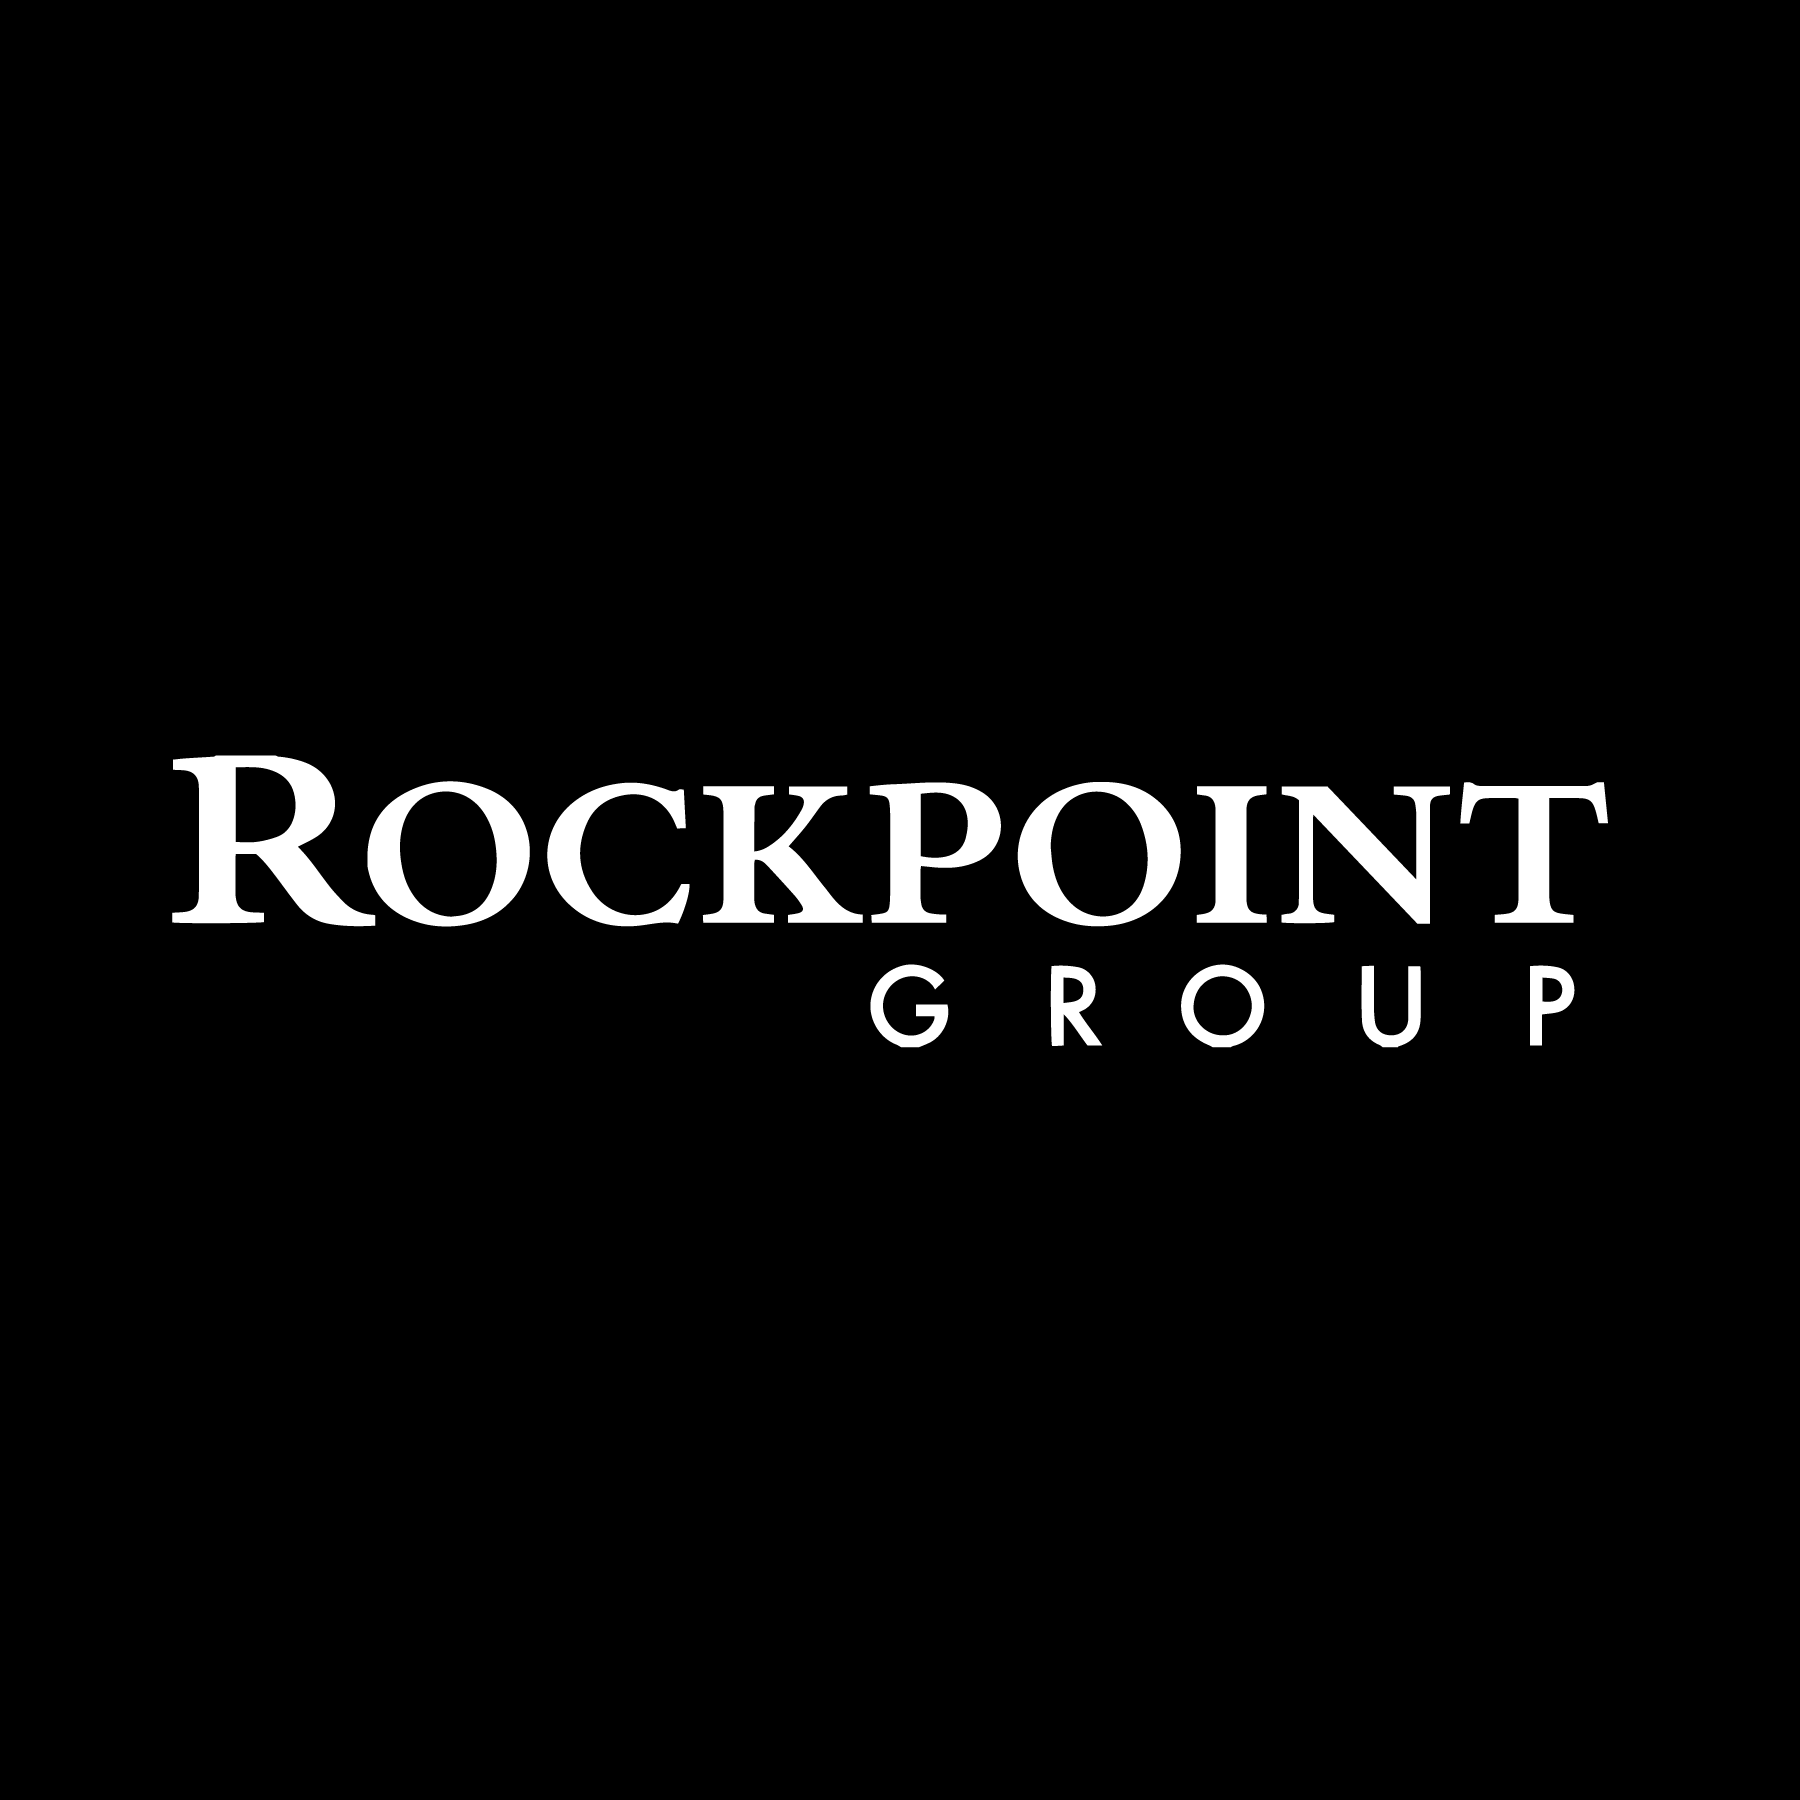 Rockpoint Group B&W.png